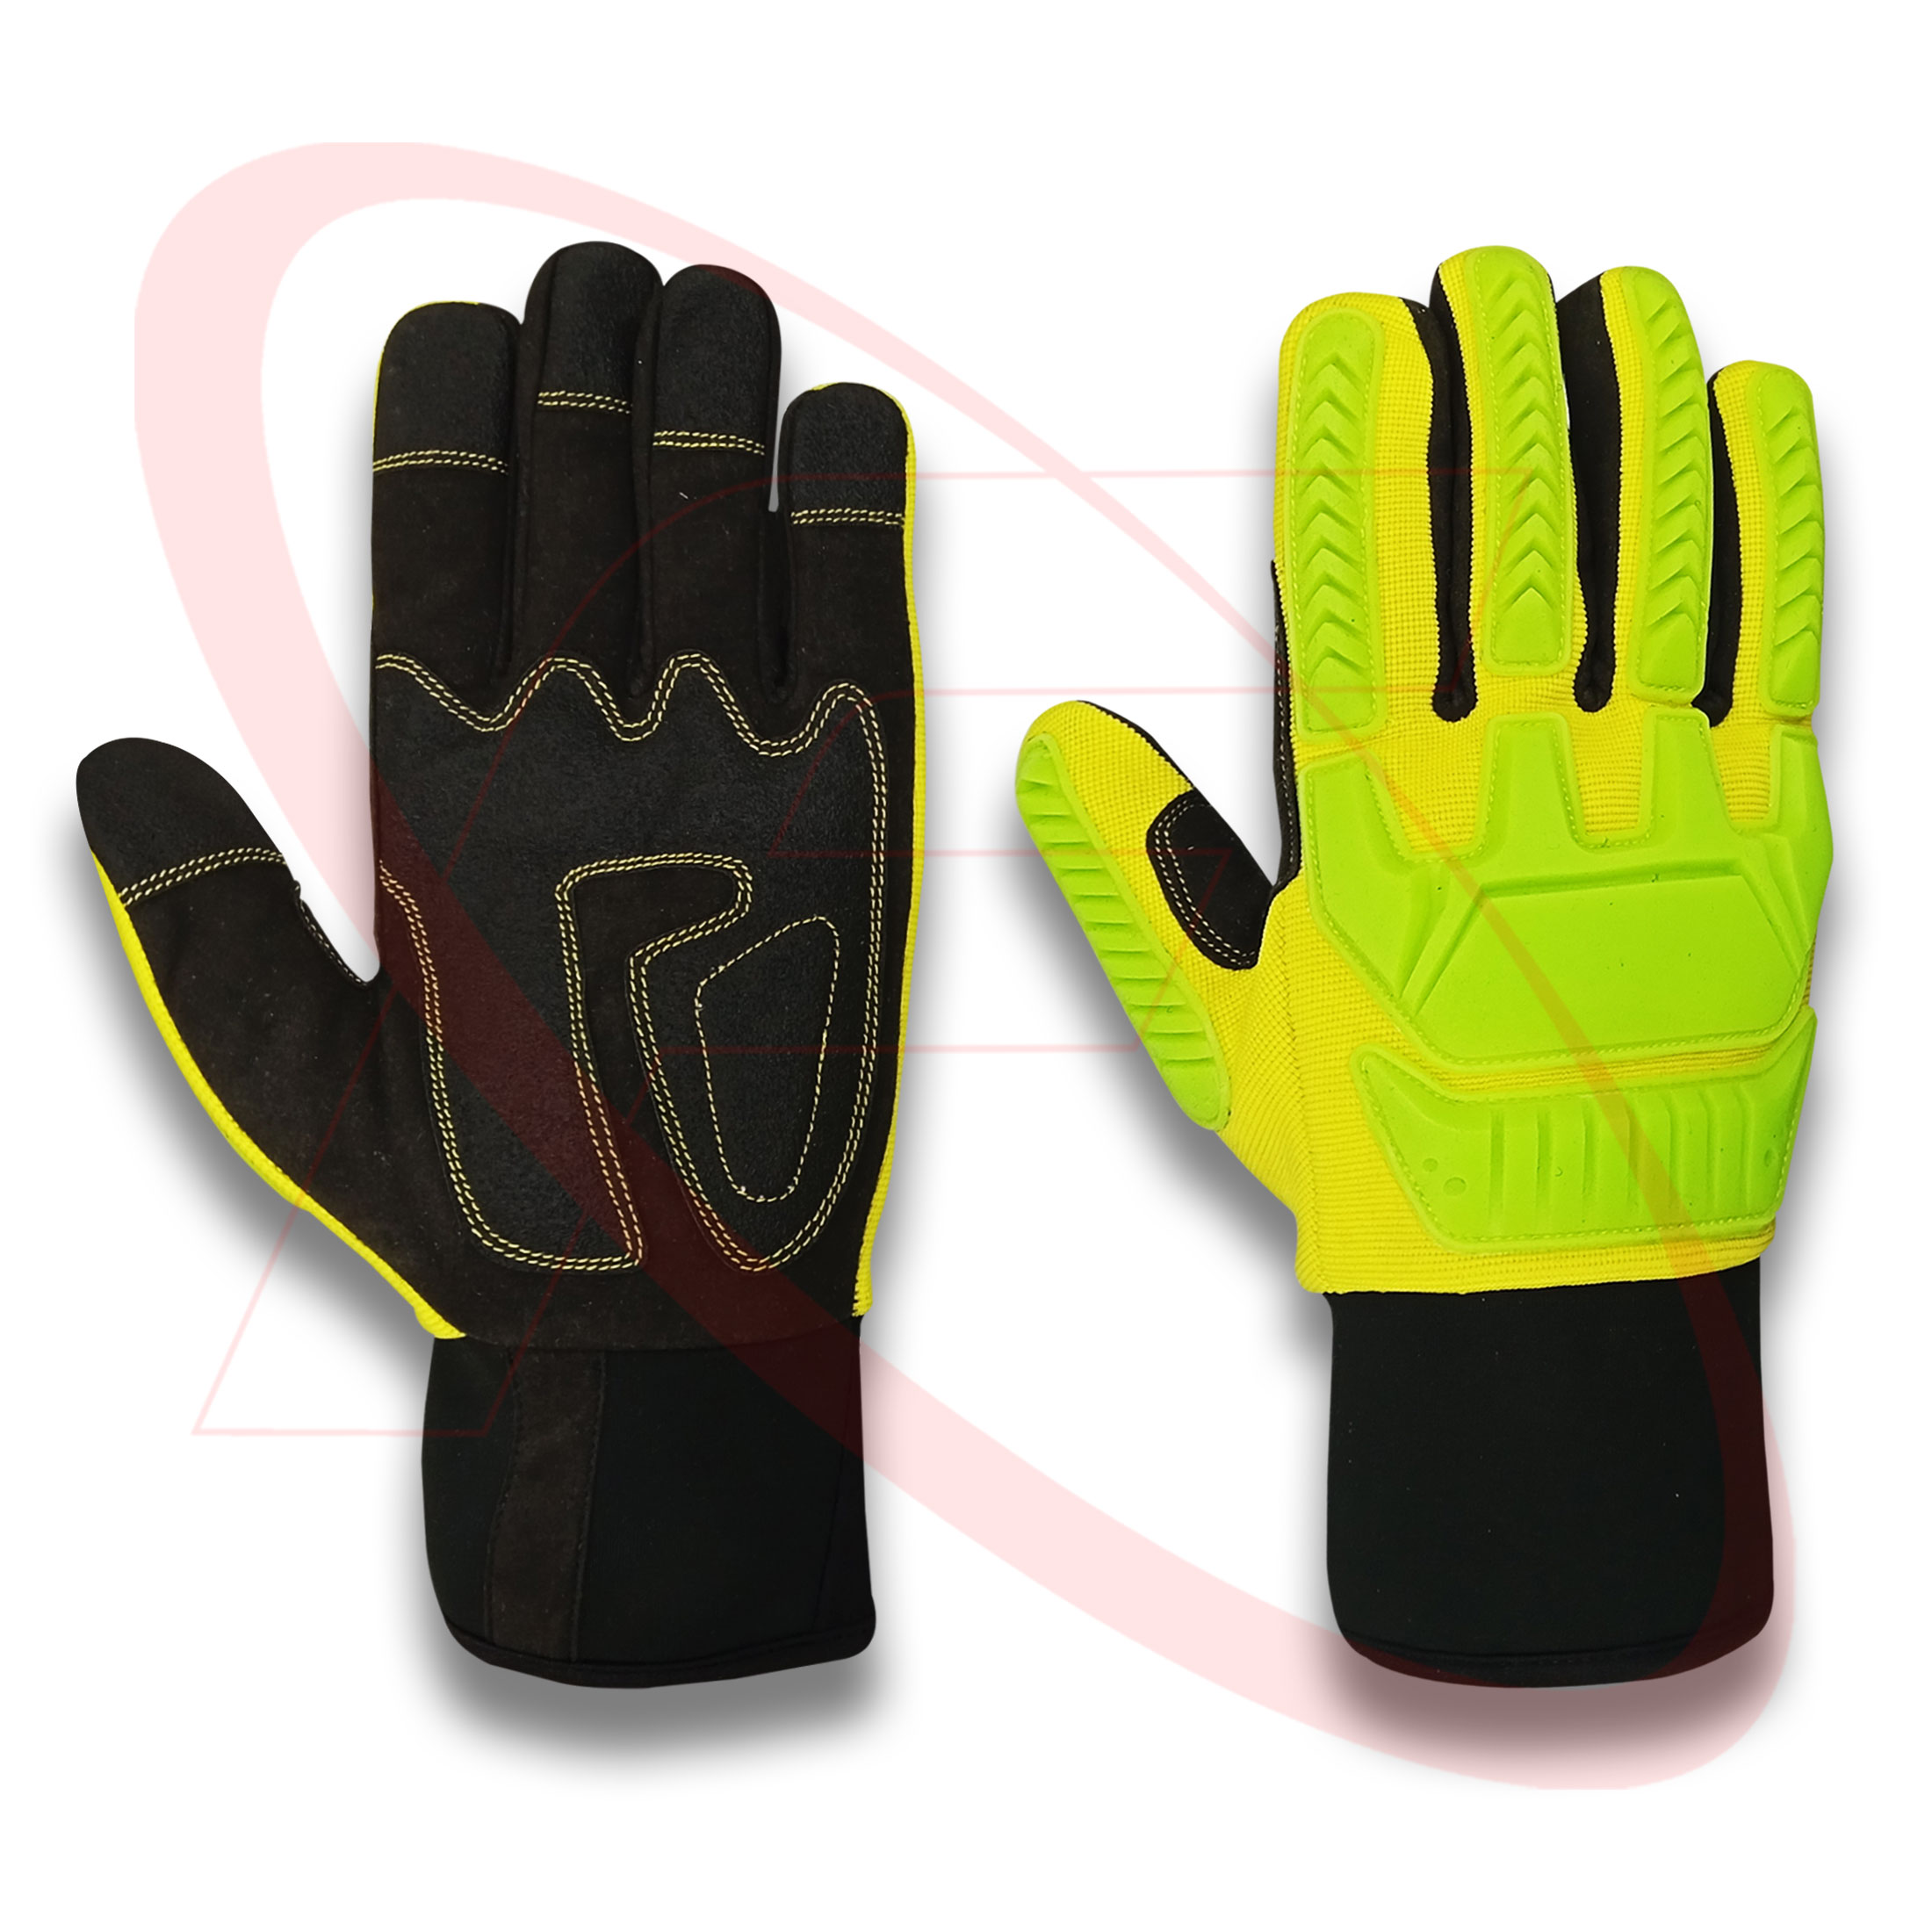 Best Quality Impact Protective Mechanic Safety Gloves Cut Resistant Gloves for Oilfield Workers Protection Gloves